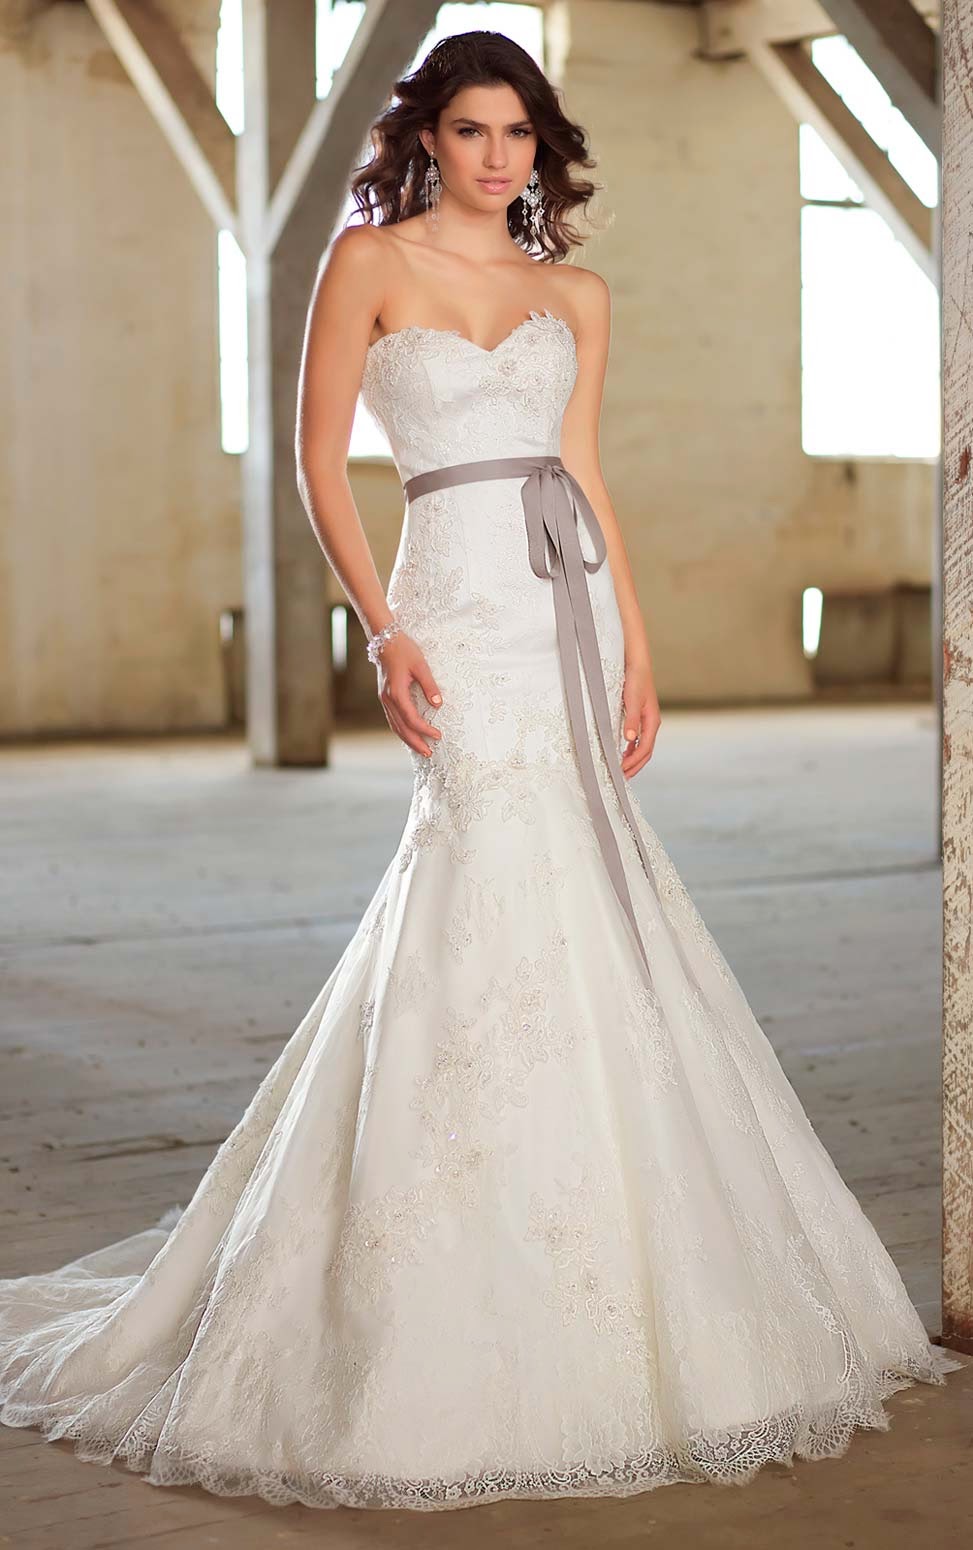 Top Cheap Wedding Dresses With Long Trains of all time The ultimate guide 